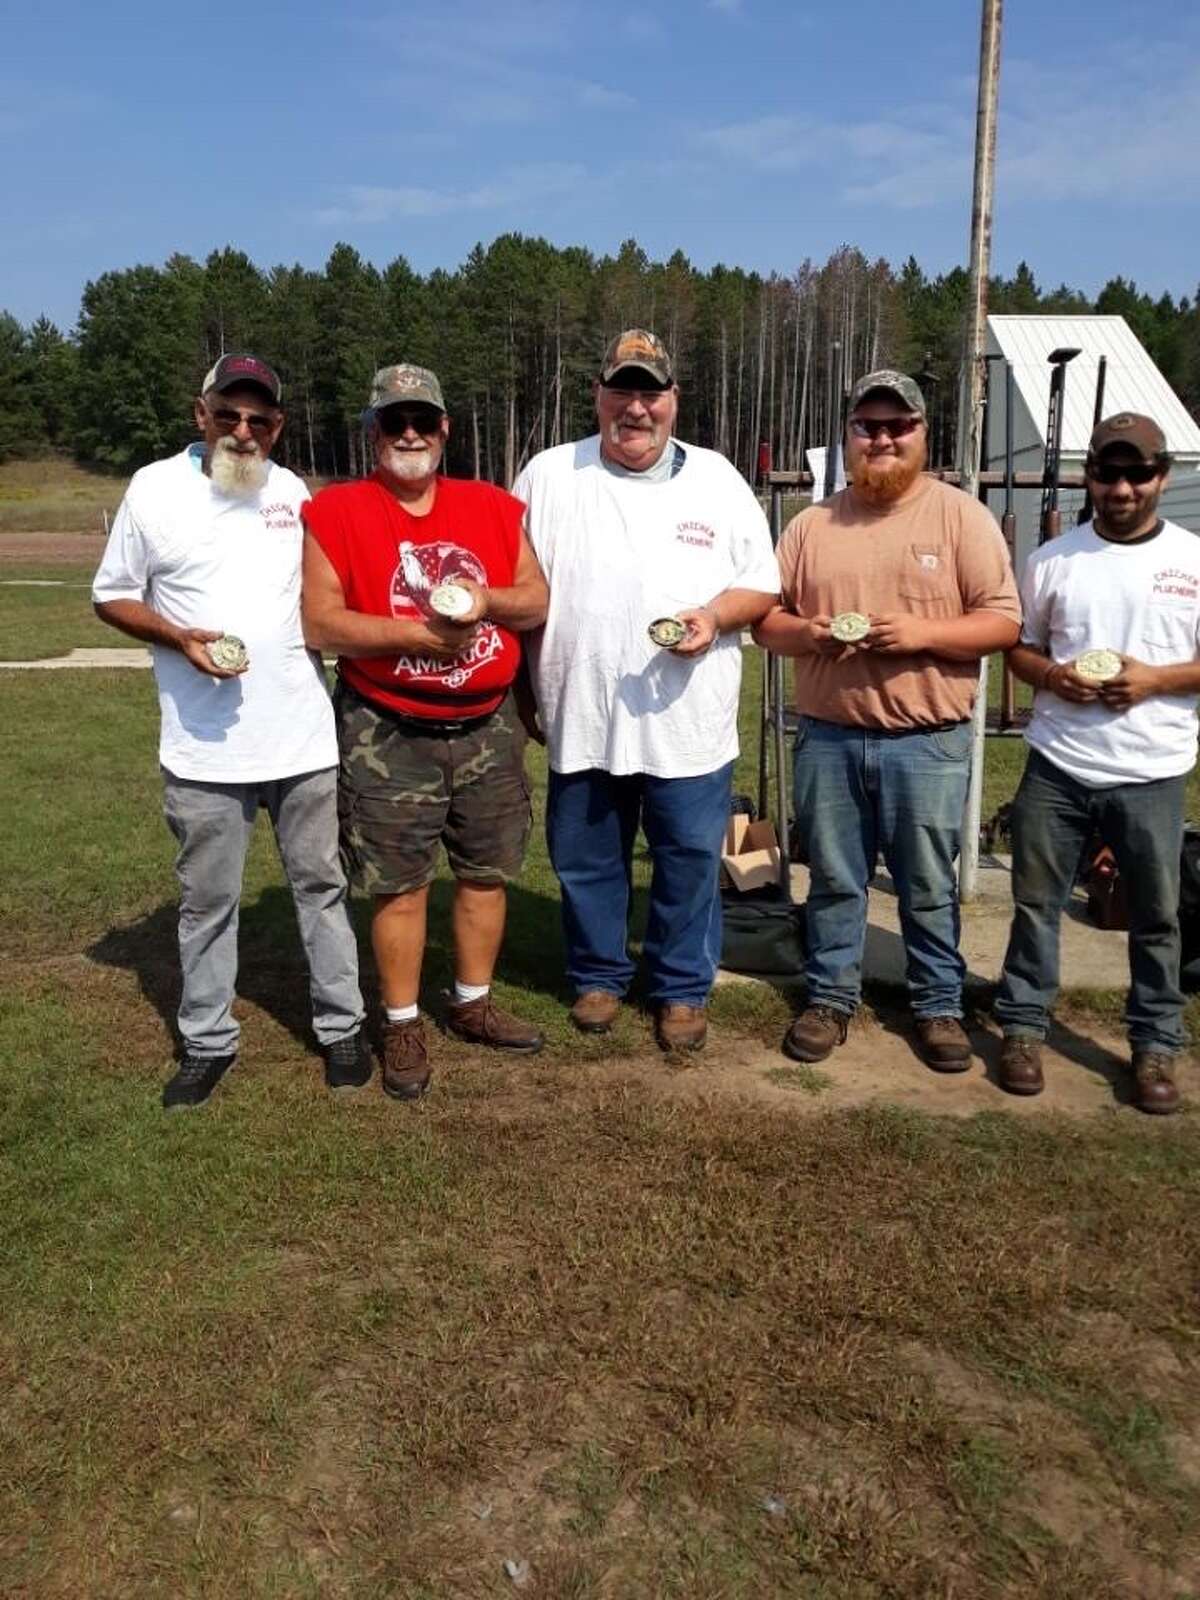 Reed City Sportsmen Club competed with 81 teams in the recent fall team shoot in Mason. The team in black shirts are:  left to right: Larry Holmes, Jackson Fox, Jim Gilchrist, David Magnuss and Jarrod Carpenter. Out of 500 targets they hit 489. The team with white/multi colored shirts are: left to right: Michael Adrianse, Terry Getts, Mark Curtis, Charles Miller and Seth Norman. The Chicken Pluckers took Class A fifth place. Out of 500 targets, they hit 472. 